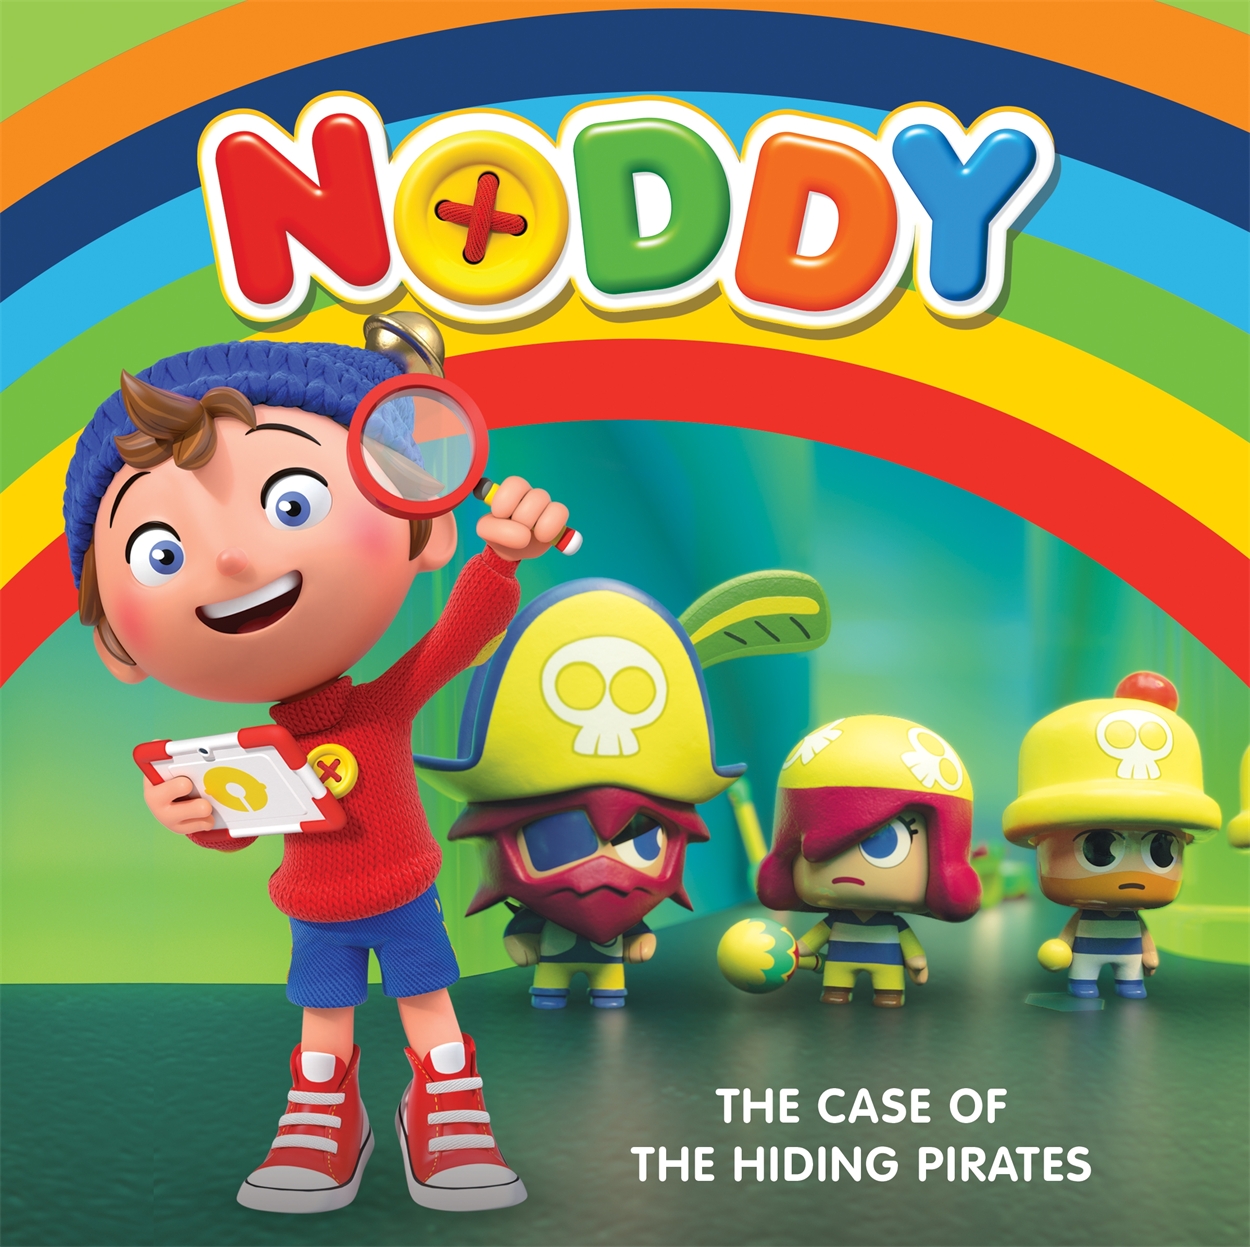 Noddy Toyland Detective: The Case of the Hiding Pirates by Enid Blyton |  Hachette UK